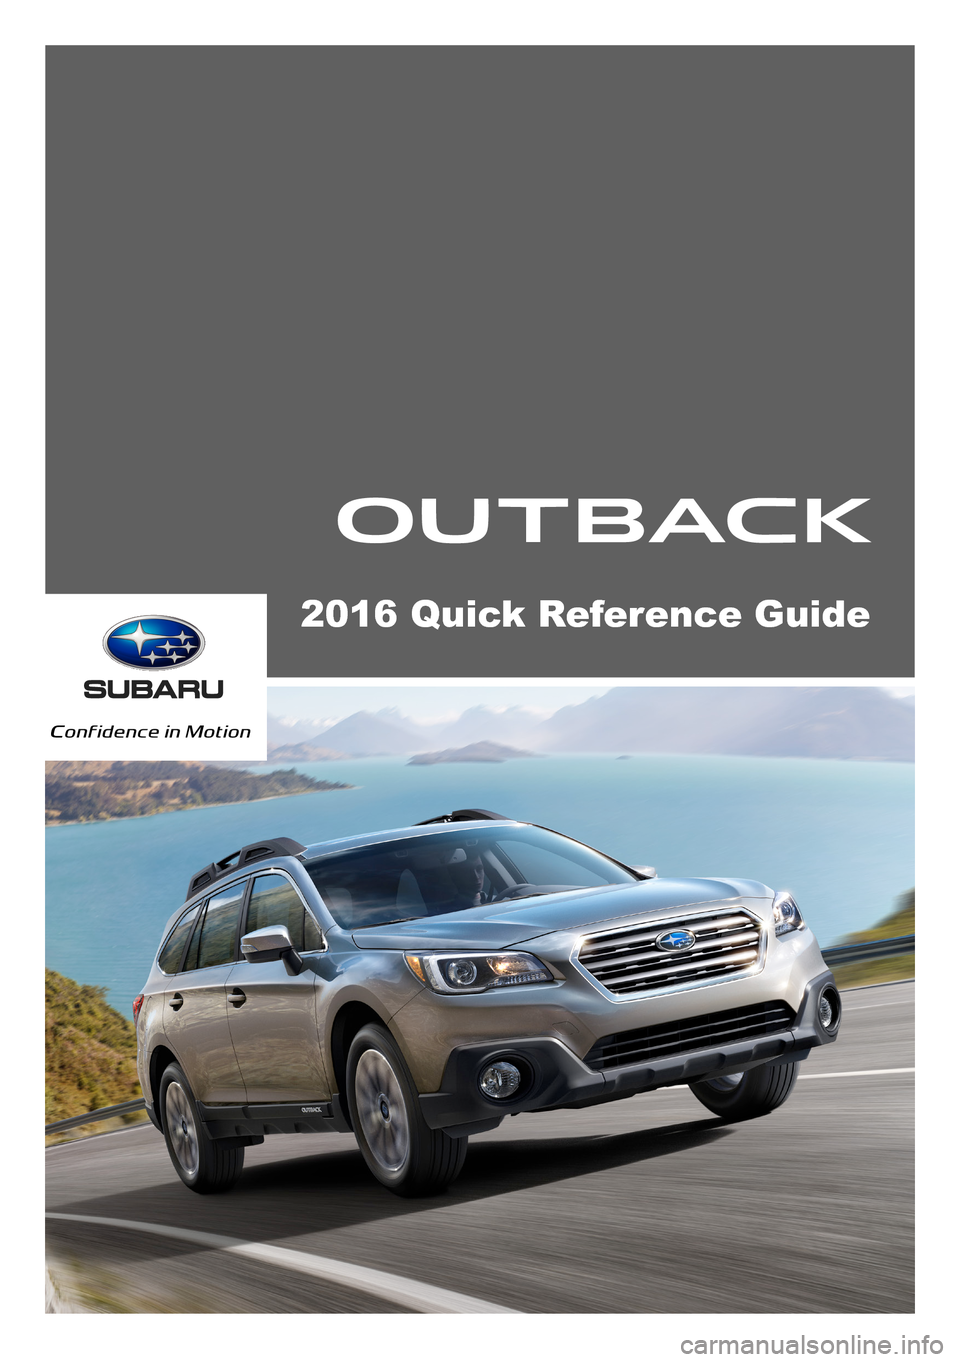 SUBARU OUTBACK 2016 6.G Quick Reference Guide 2016 Quick Reference Guide 